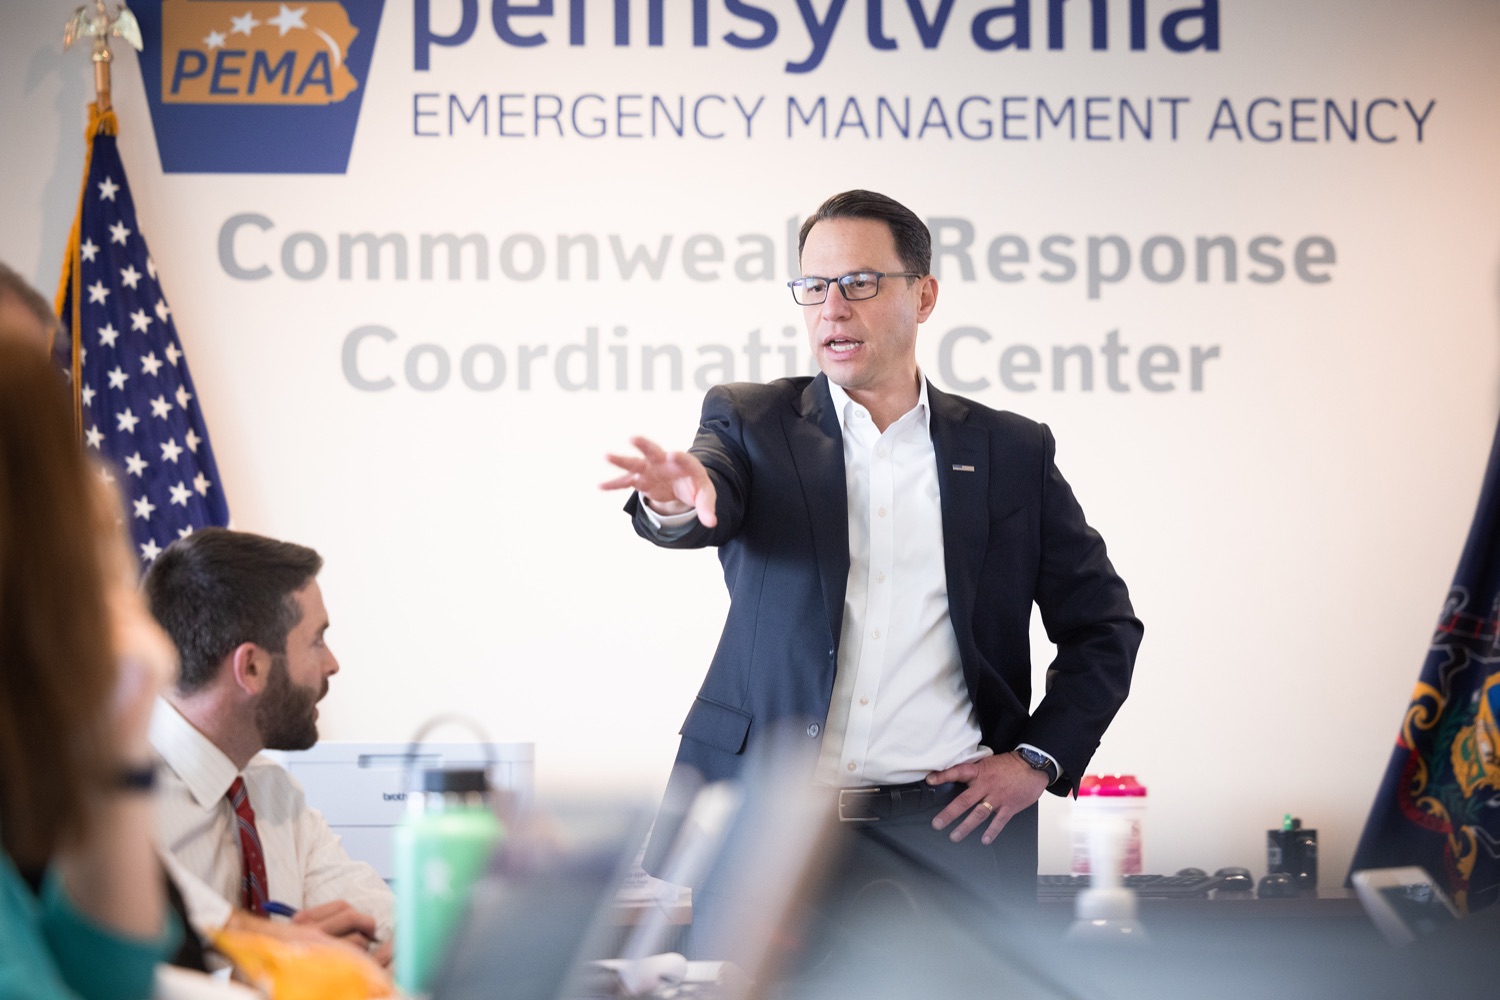 Governor Shapiro consulting with emergency management officials before giving urgent update on East Palestine train derailment from the PEMA media center.  FEBRUARY 06, 2023 - HARRISBURG, PA<br><a href="https://filesource.amperwave.net/commonwealthofpa/photo/22620_gov_trainDerailment_dz_015.JPG" target="_blank">⇣ Download Photo</a>